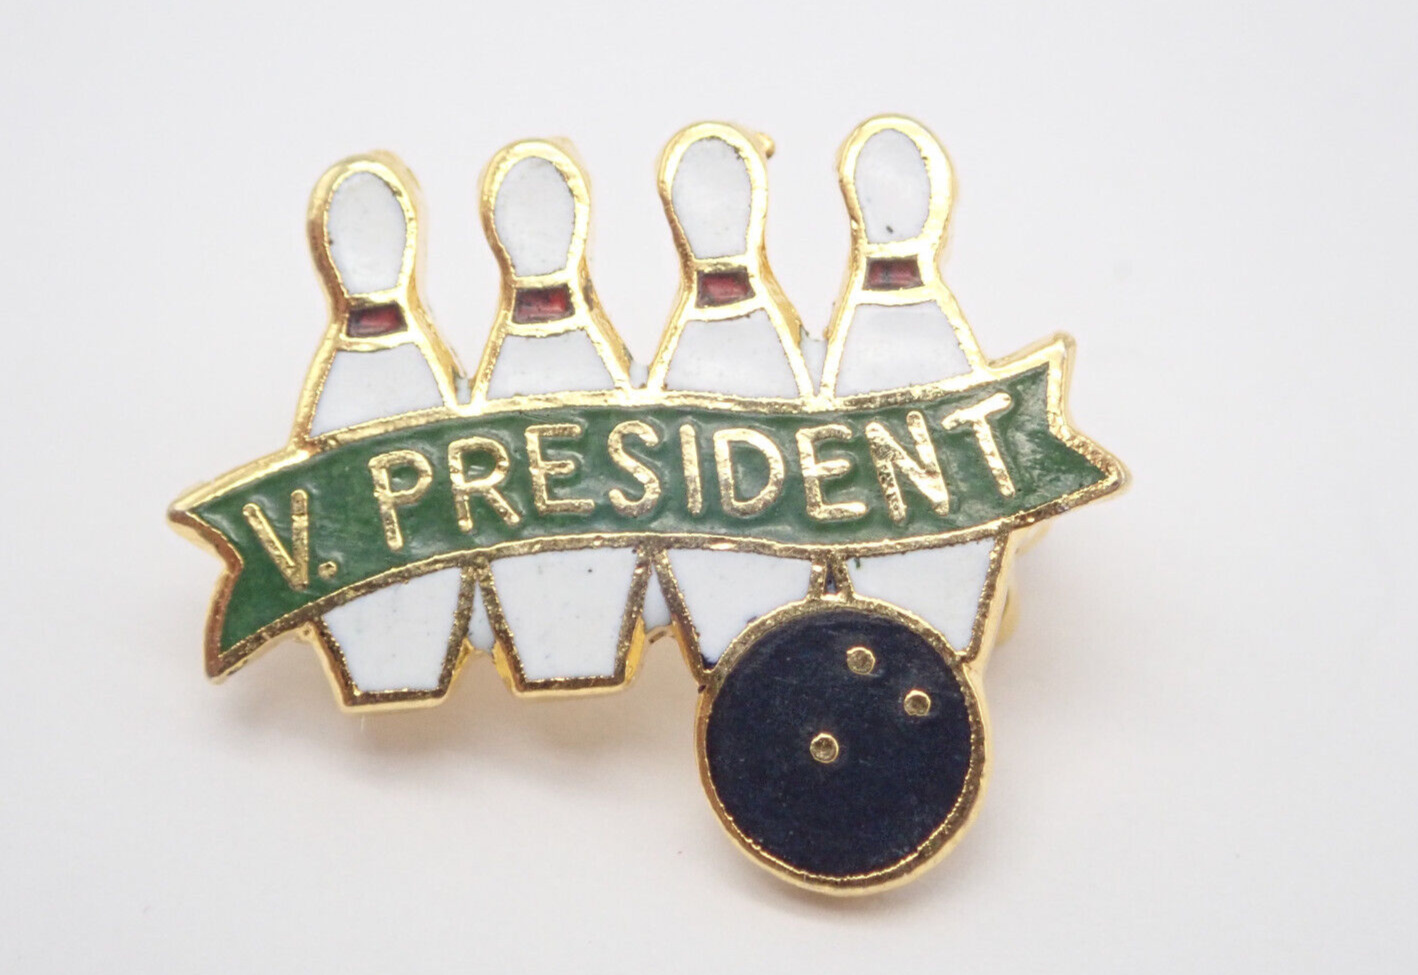 Vice President Bowling Pins and Ball Gold Tone Vintage Lapel Pin